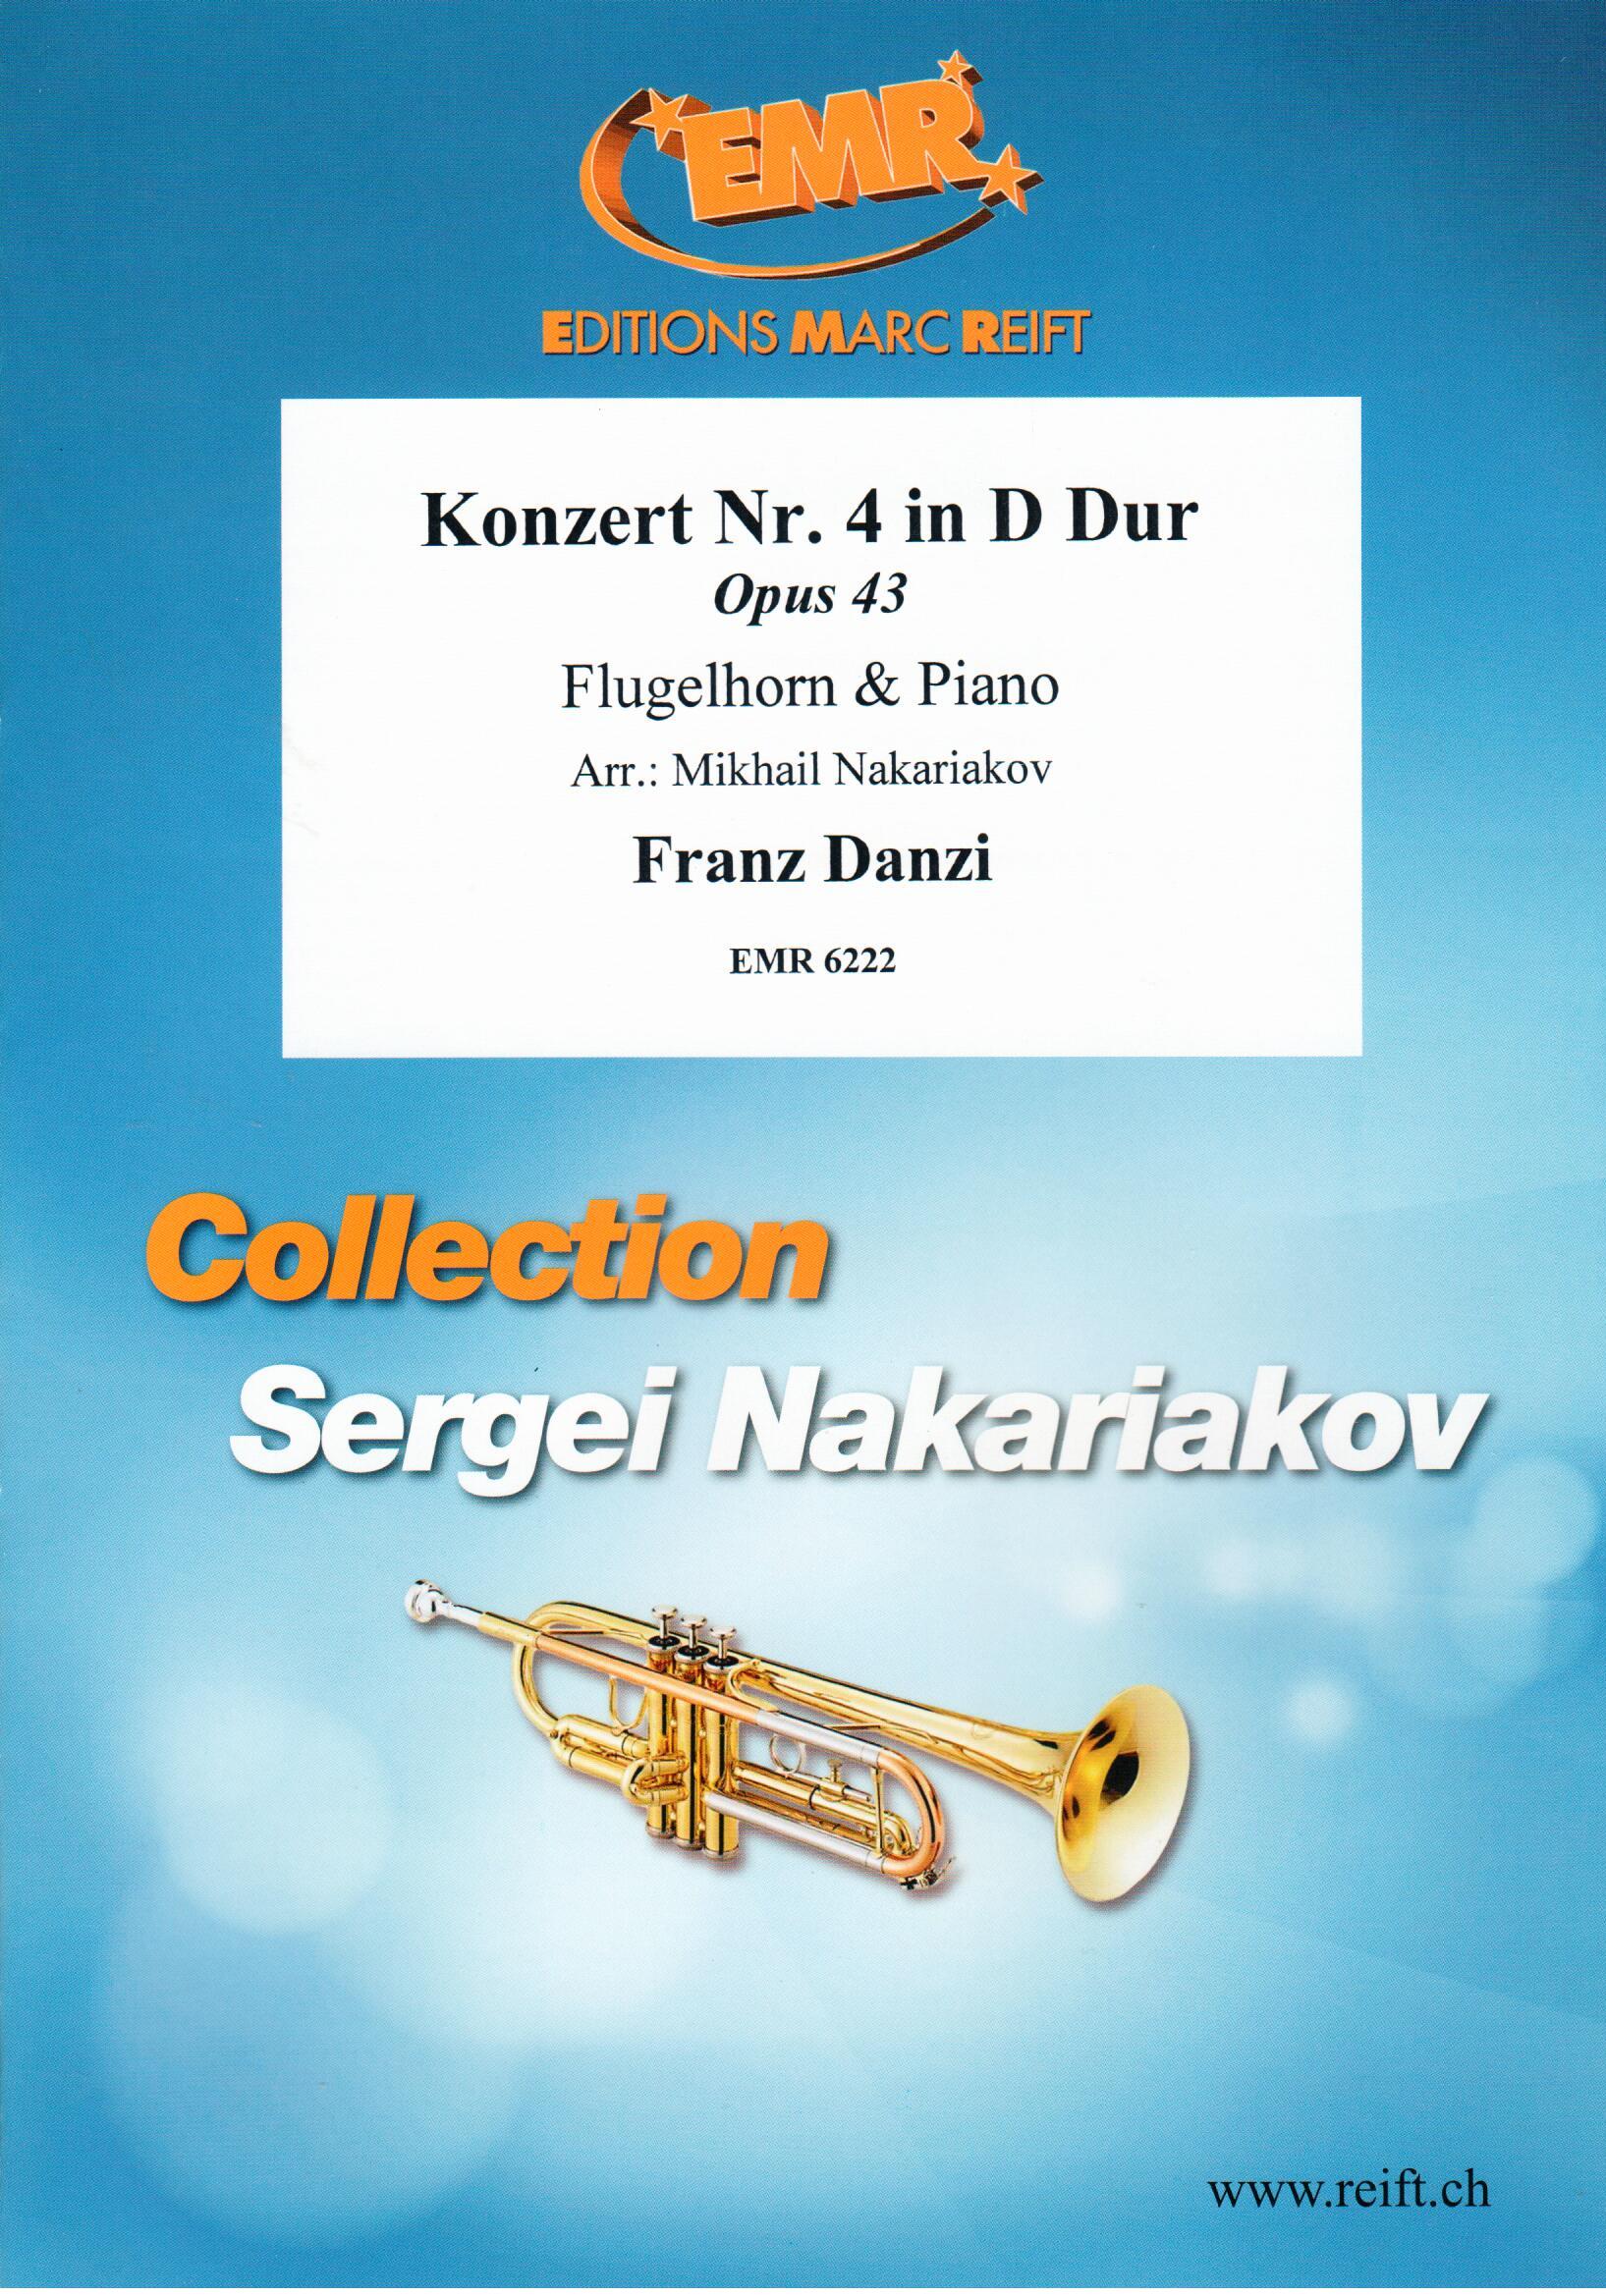 KONZERT NR. 4 IN D DUR, SOLOS - B♭. Cornet/Trumpet with Piano